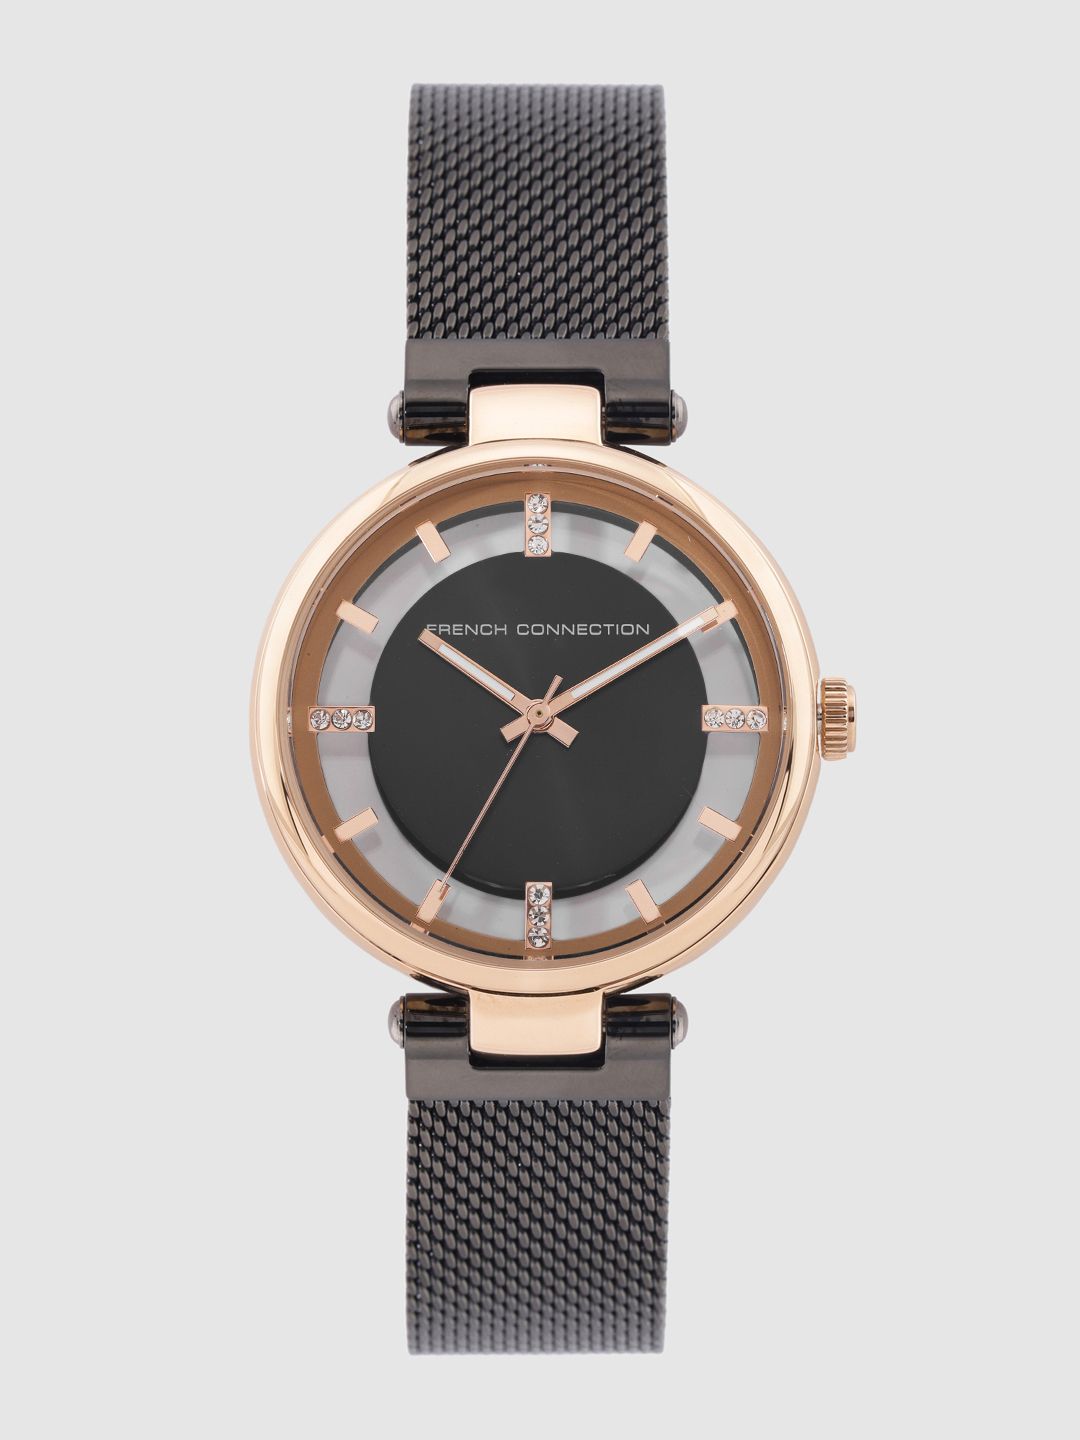 French Connection Women Black & Gold-Toned Analogue Watch Price in India